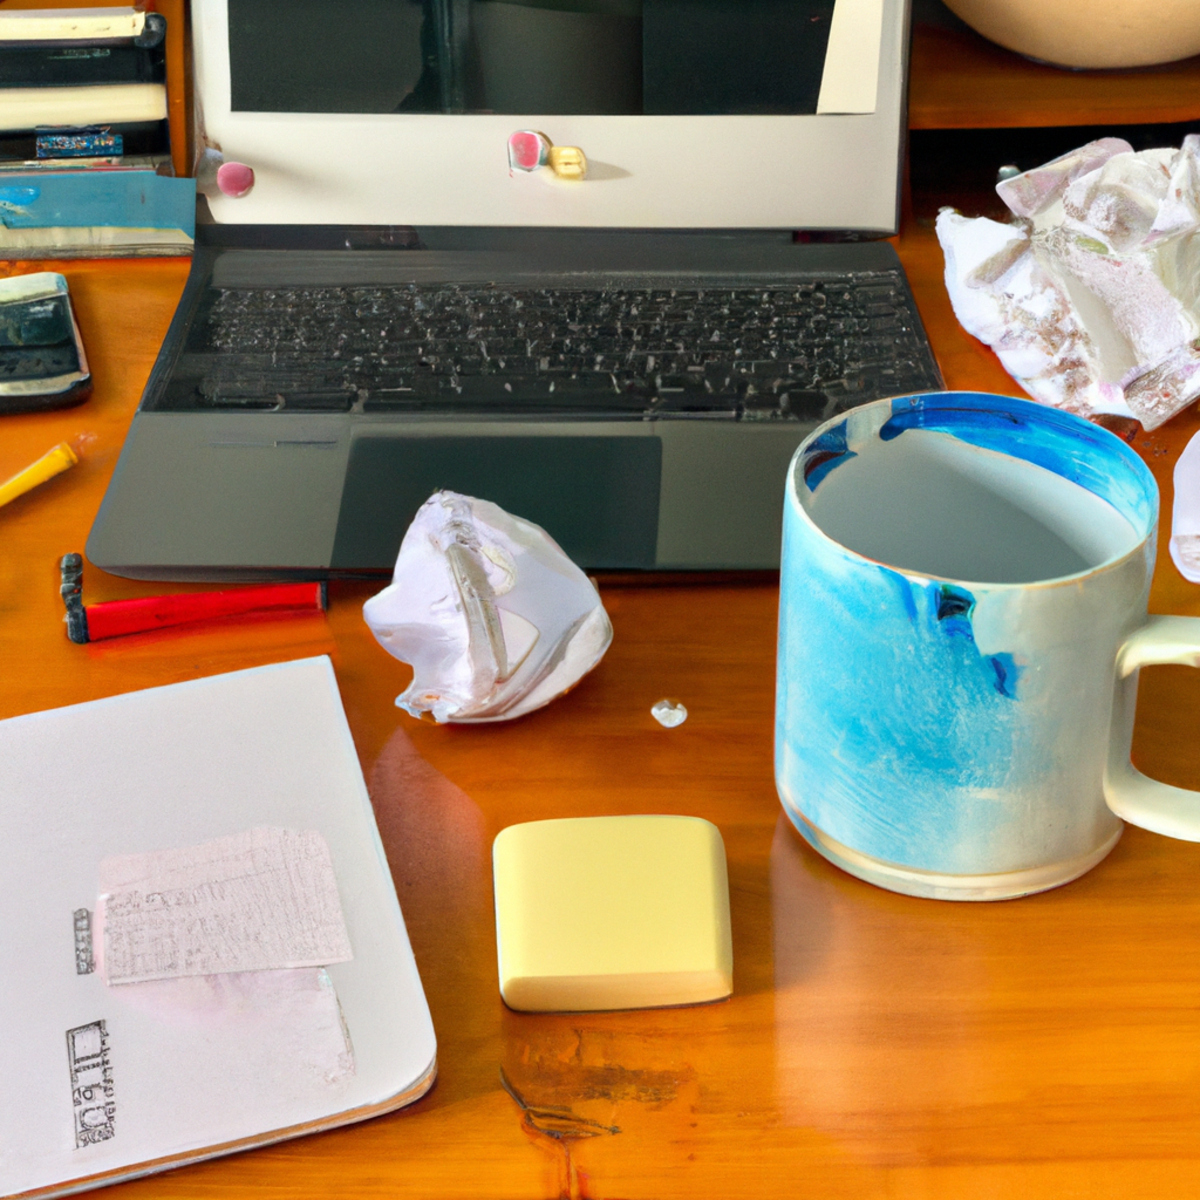 Mindful worker's desk: papers, coffee, laptop, phone, stress ball. Despite clutter, a sense of calm and focus.